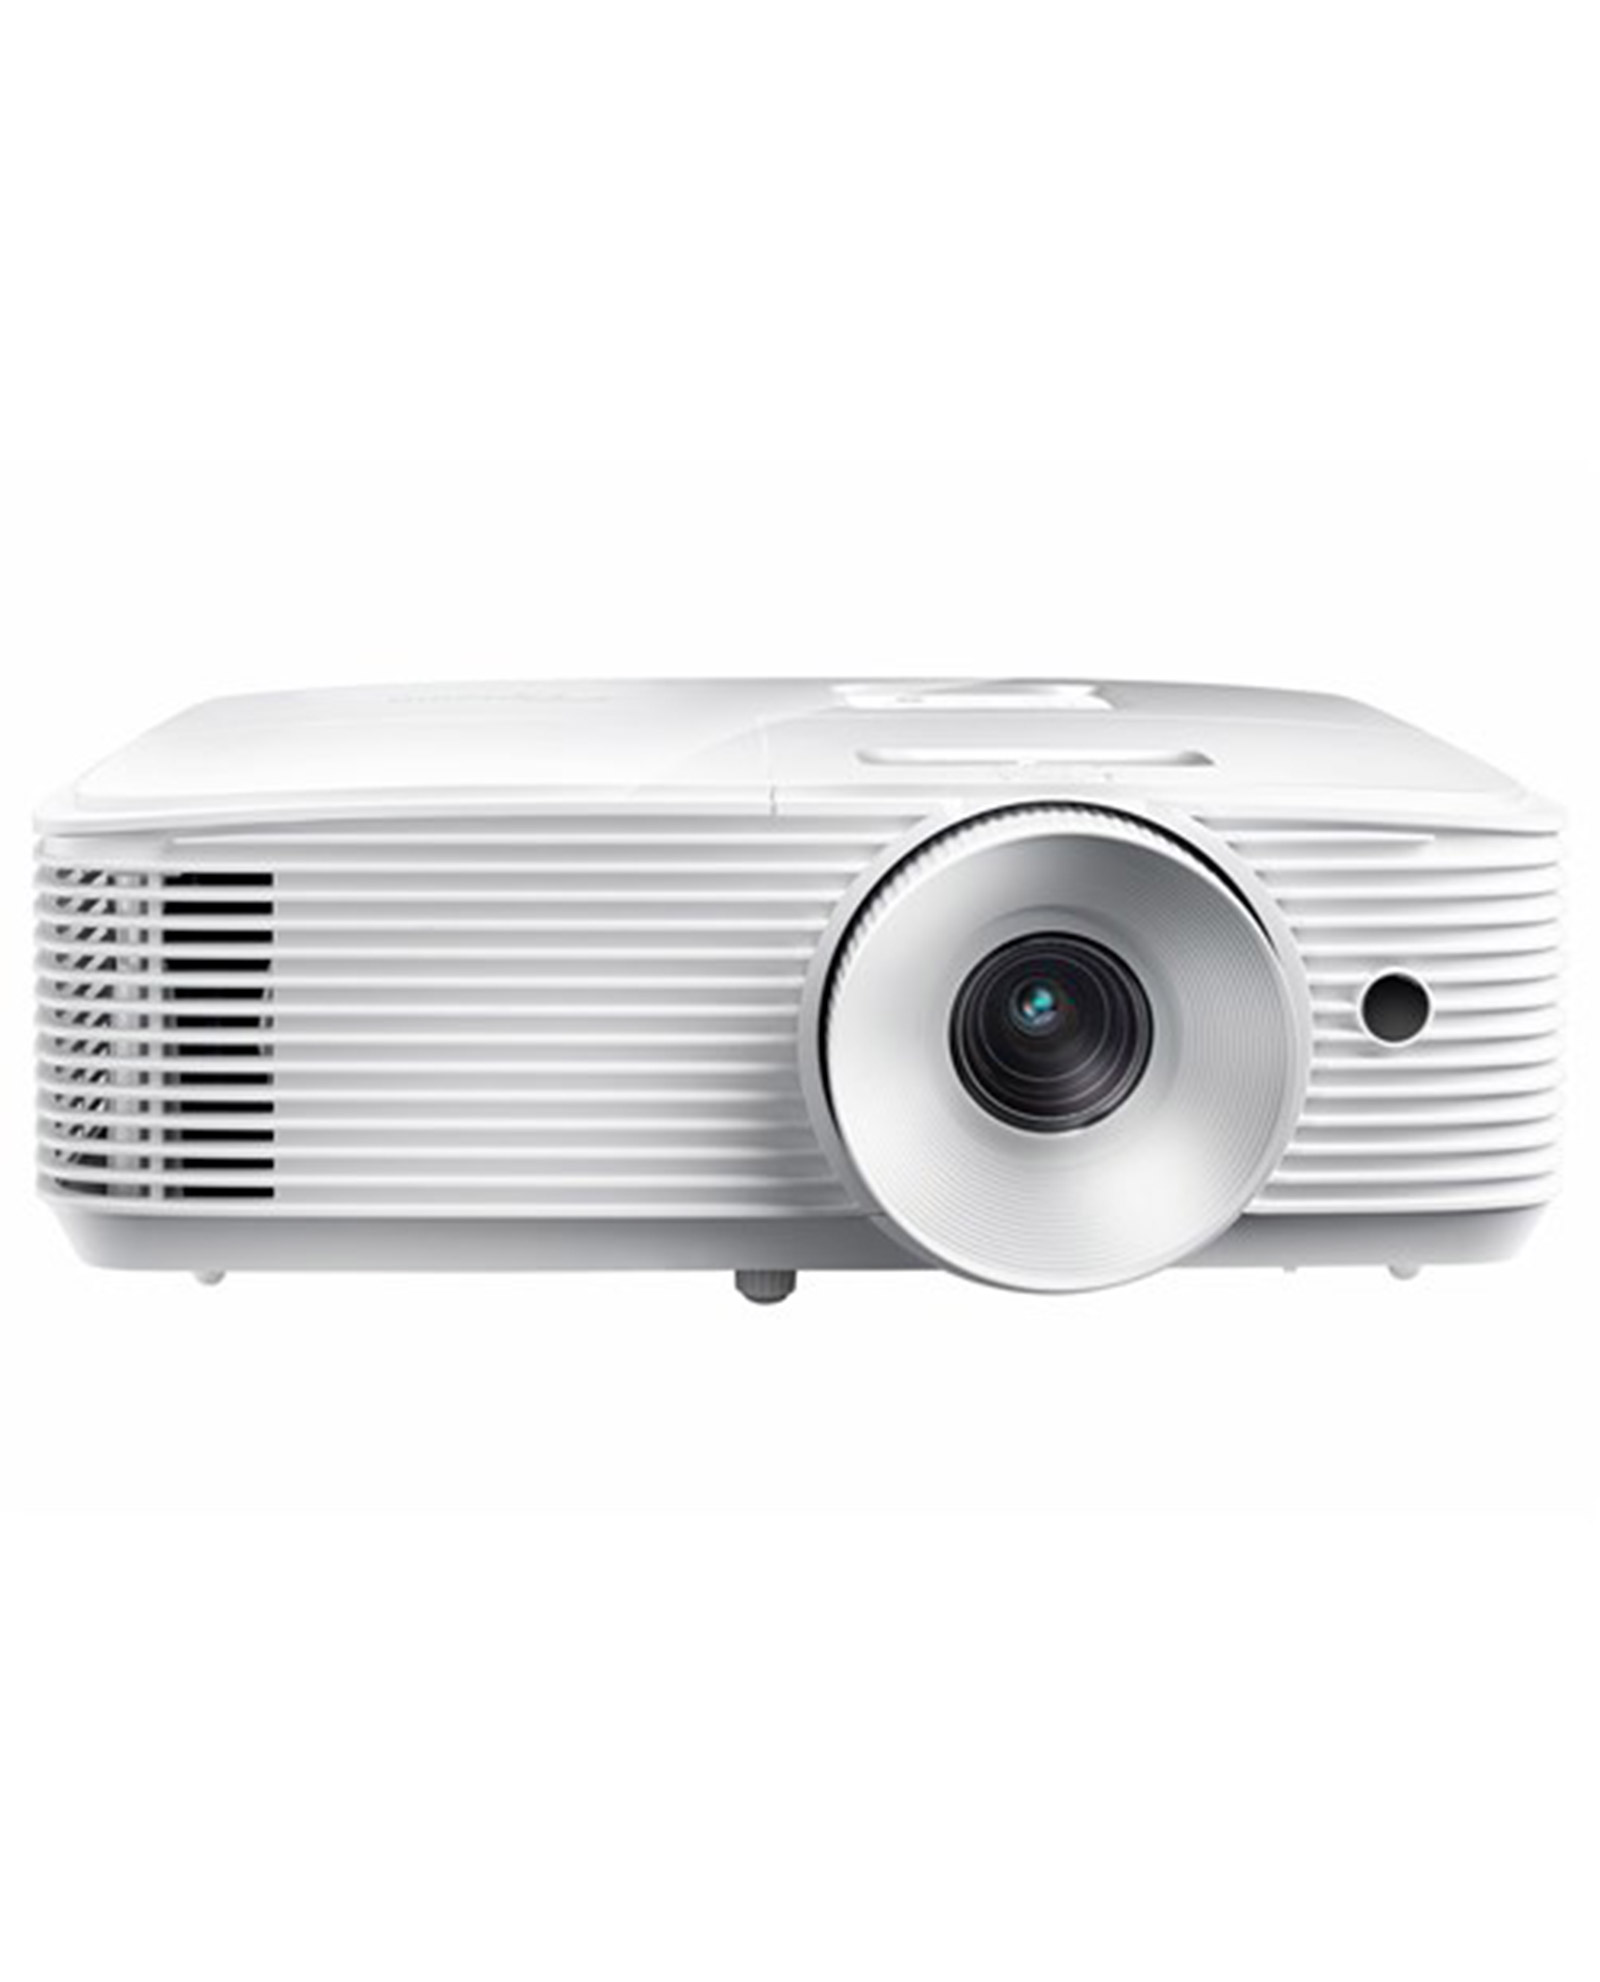 Optoma Hd30hdr 3800lm 1080p 50000 1 Home Theatre Projector